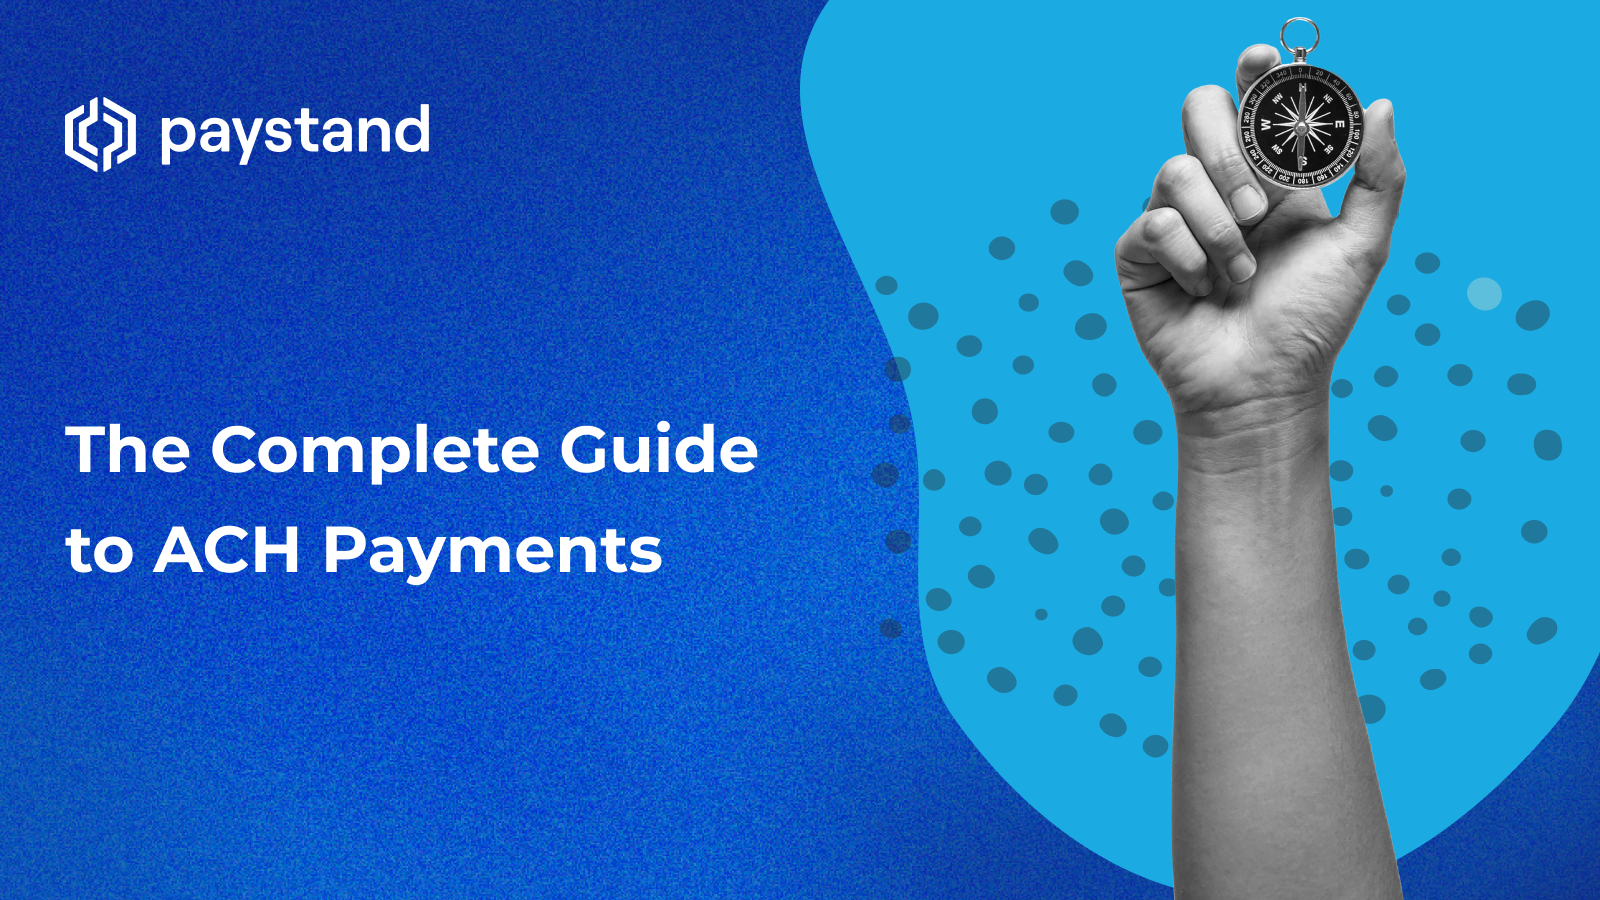 The Complete Guide to ACH Payments